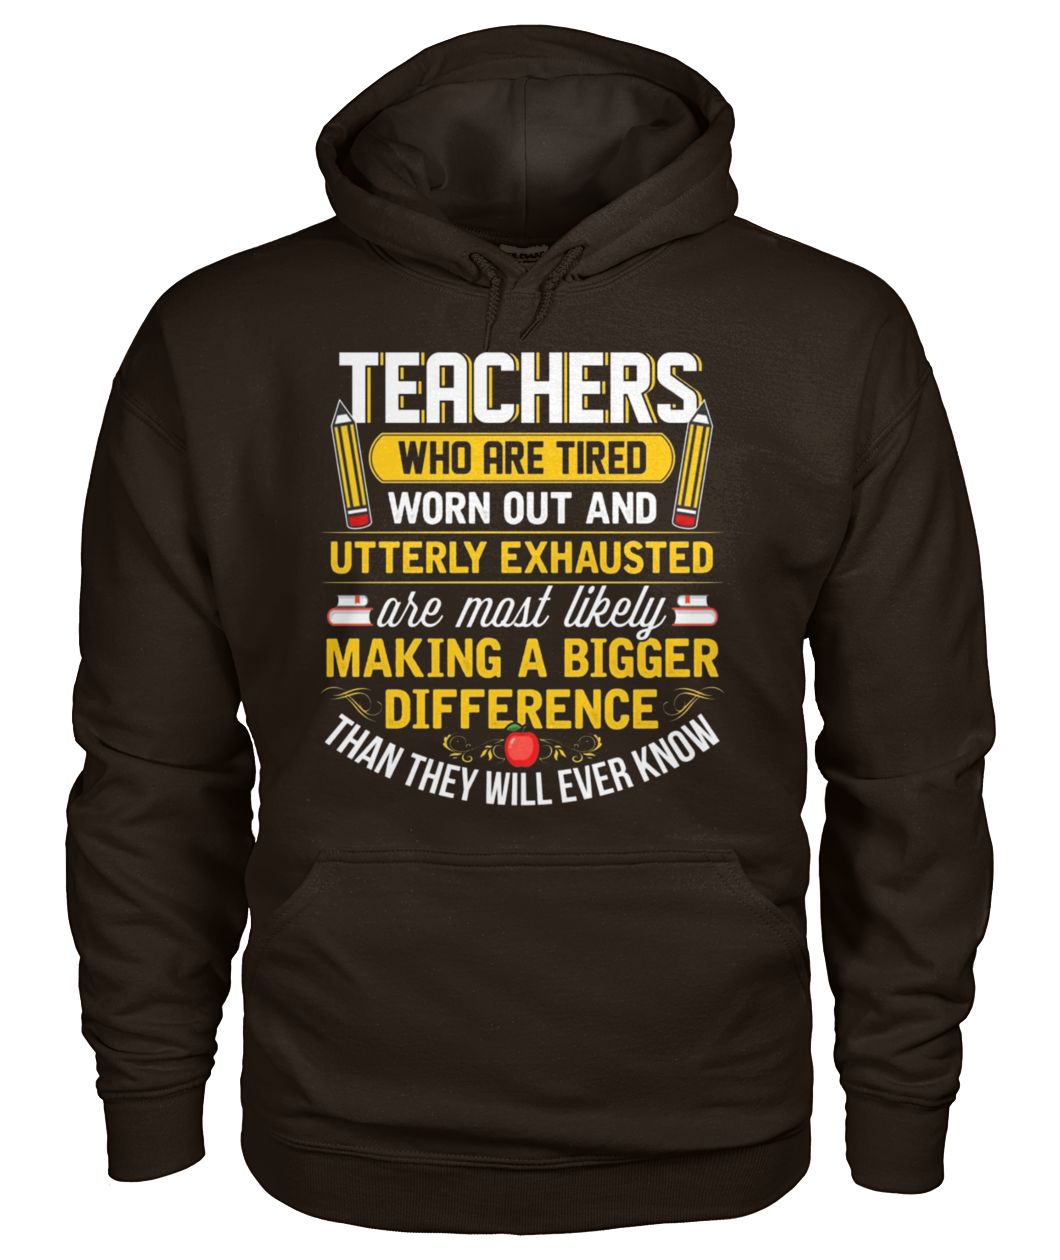 Teacher who are tired worn out and utterly exhausted gildan hoodie